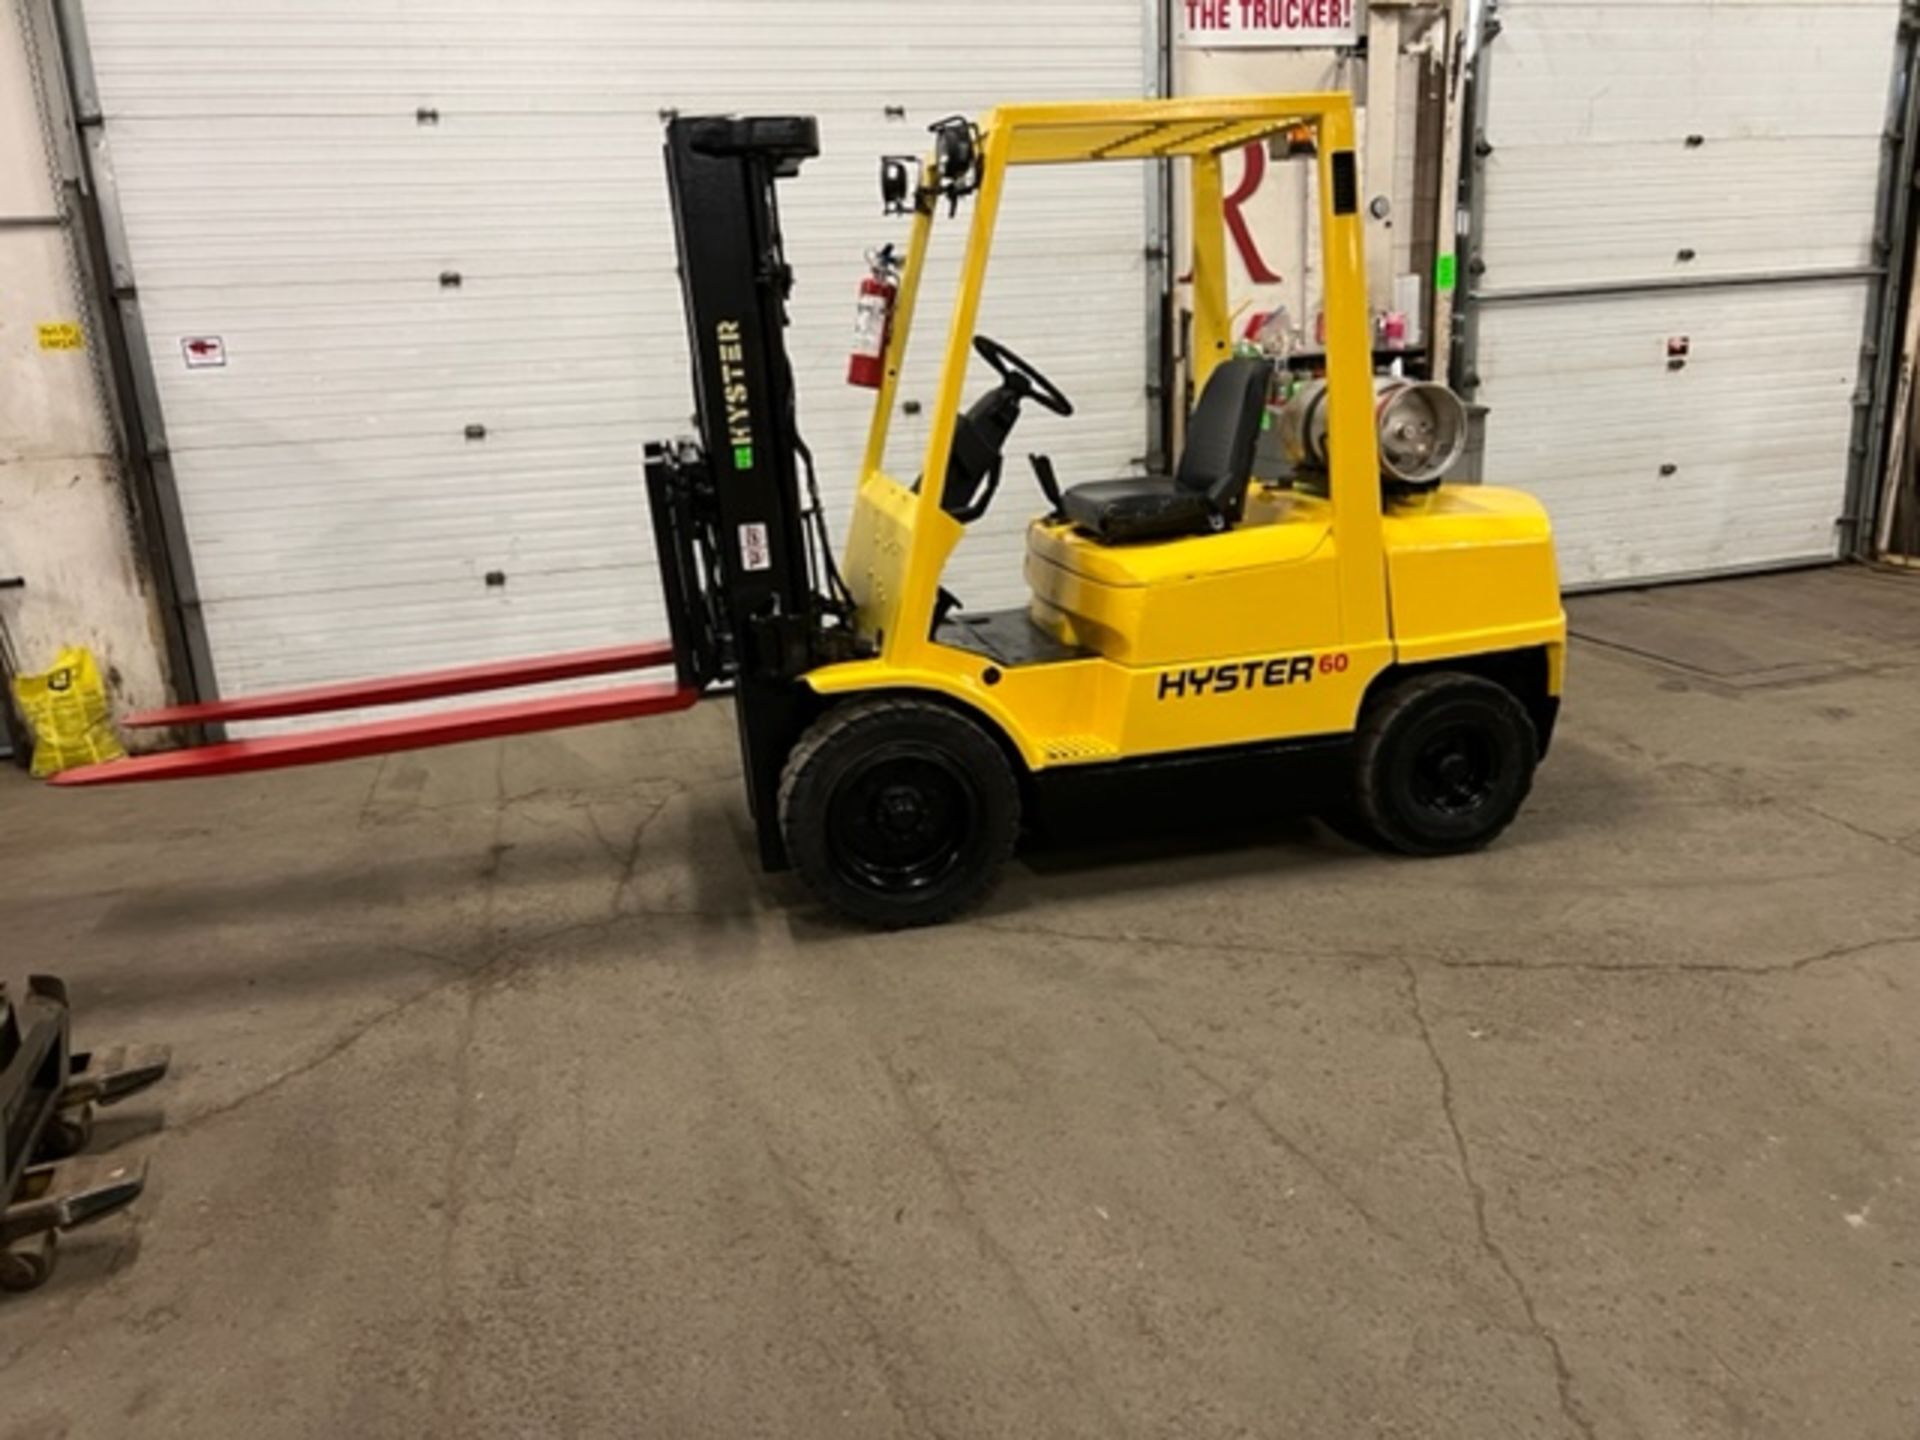 FREE CUSTOMS - NICE Hyster H60 6,000lbs Capacity OUTDOOR Forklift LPG (propane) with SIDESHIFT & 60"